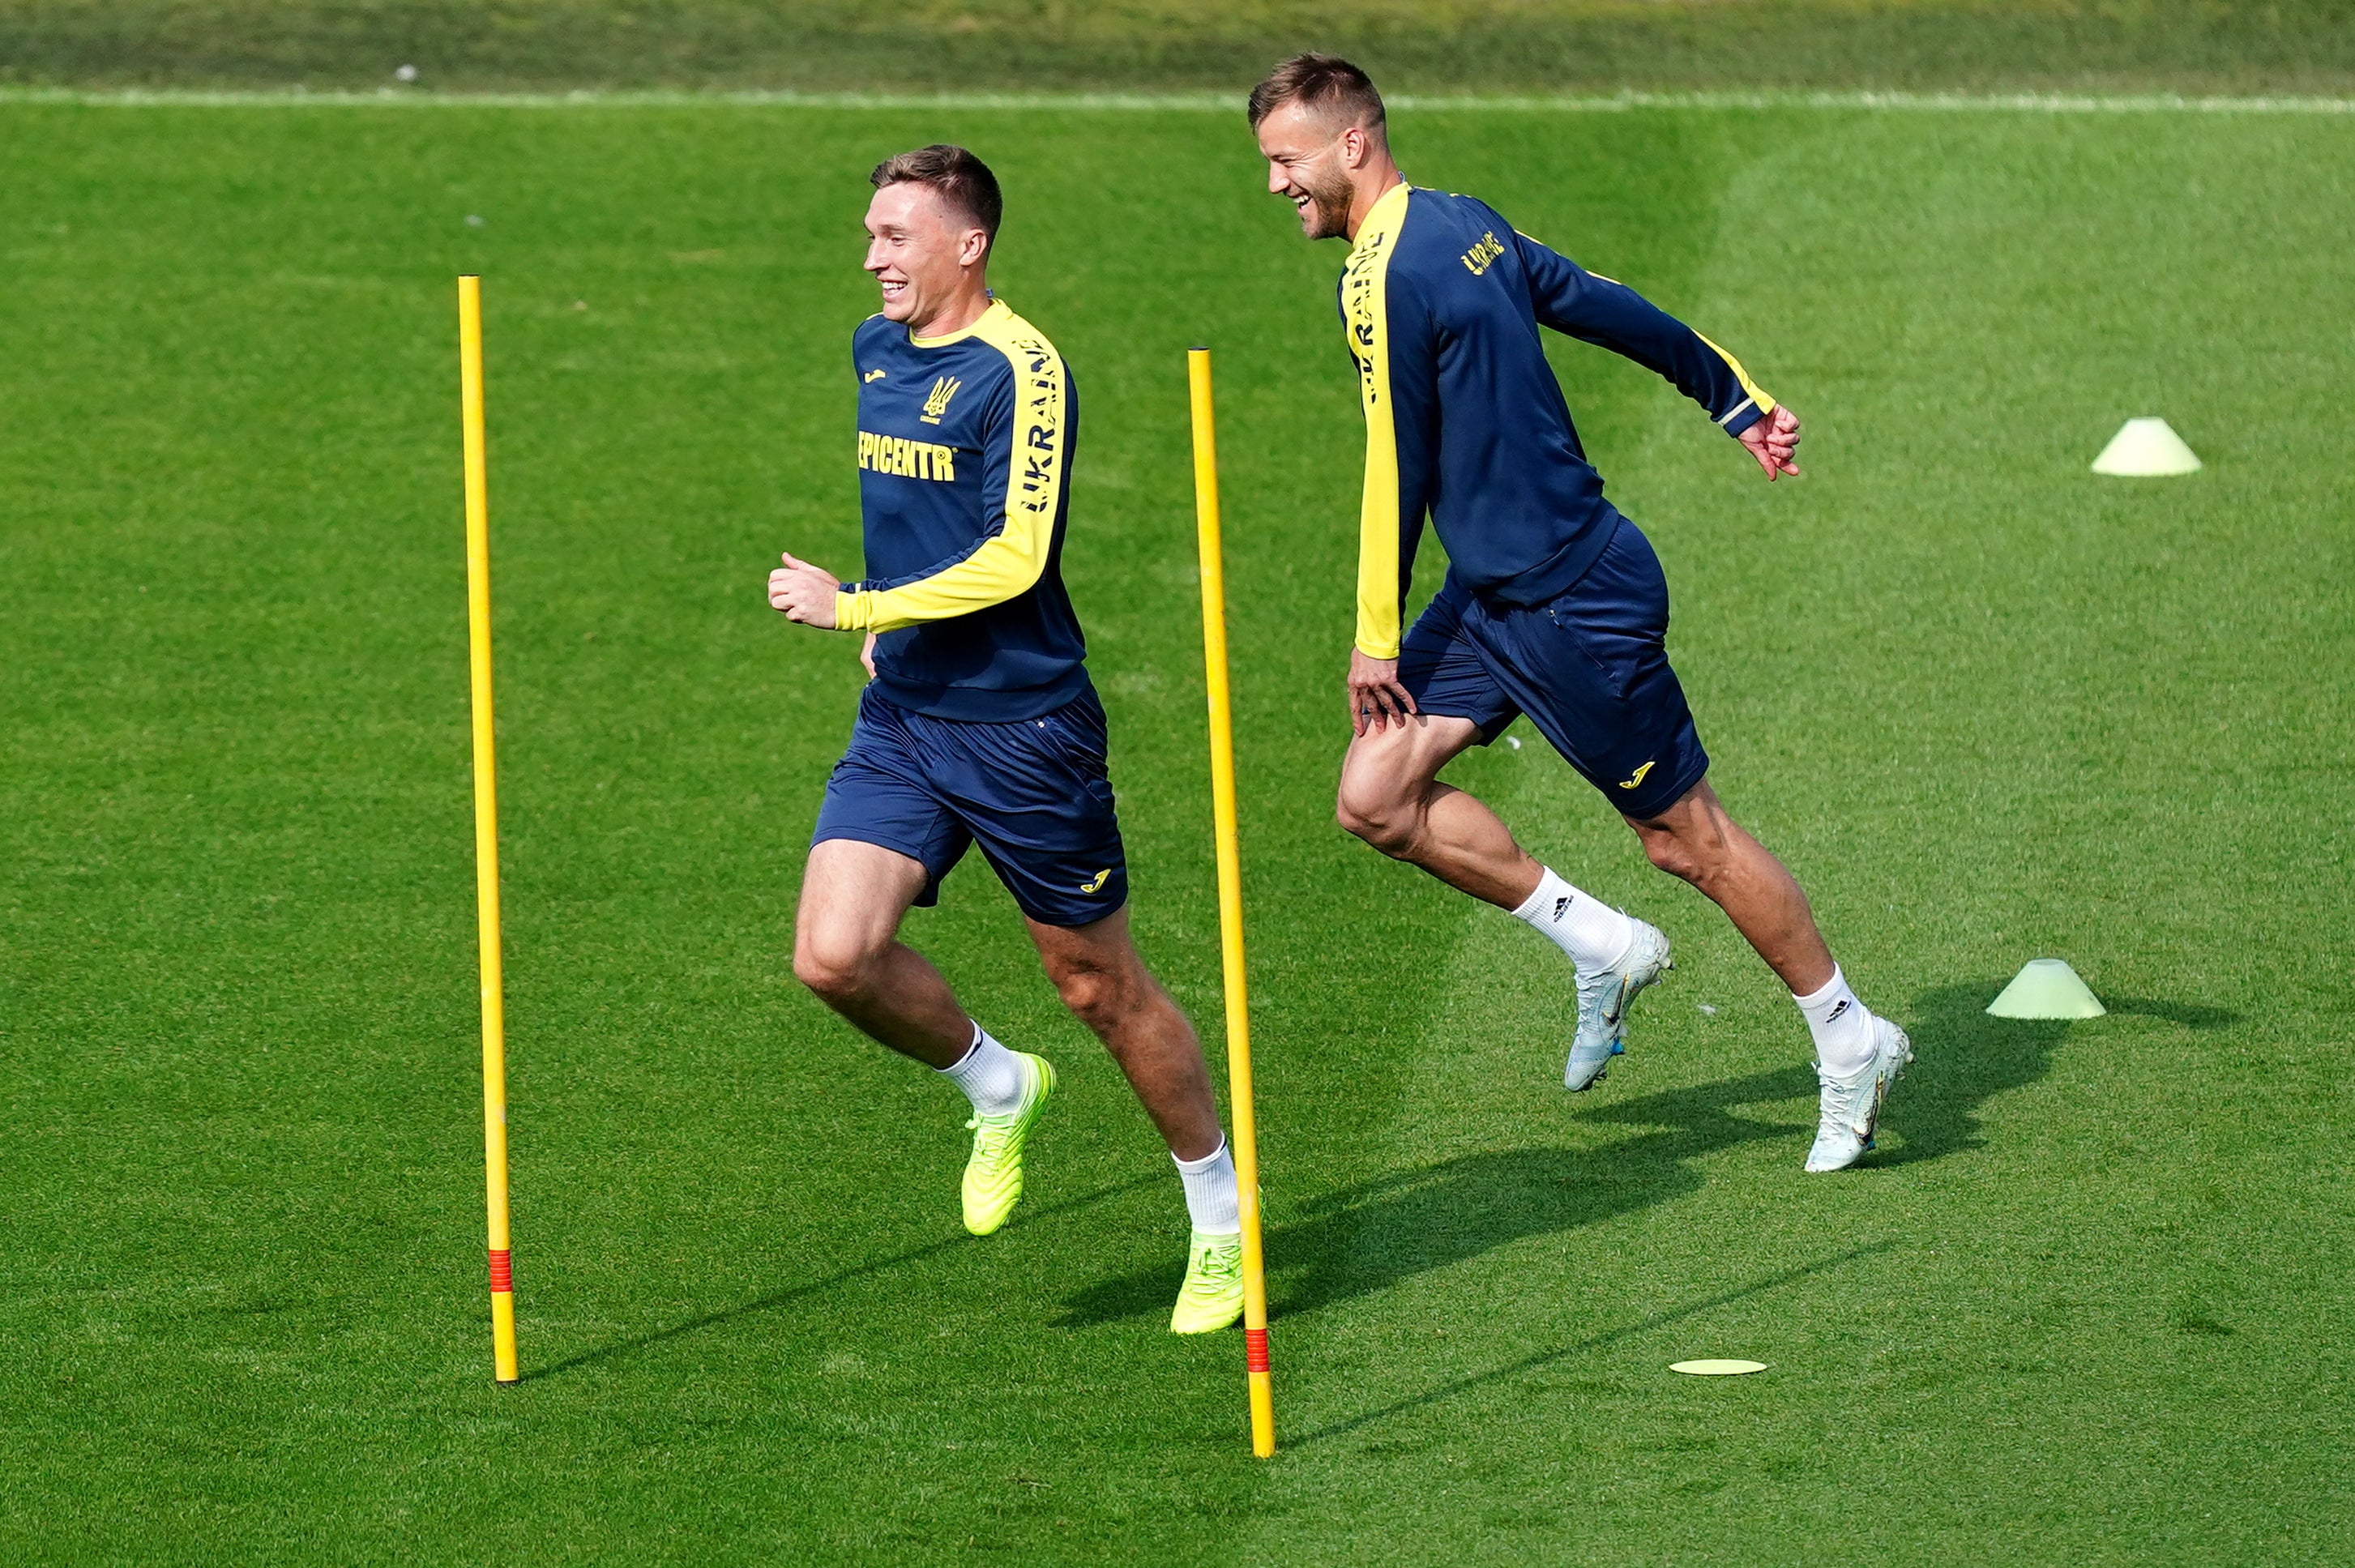 Ukraine were training at Cardiff City Stadium ahead of Sunday’s World Cup play-off final against Wales (Mike Egerton/PA)